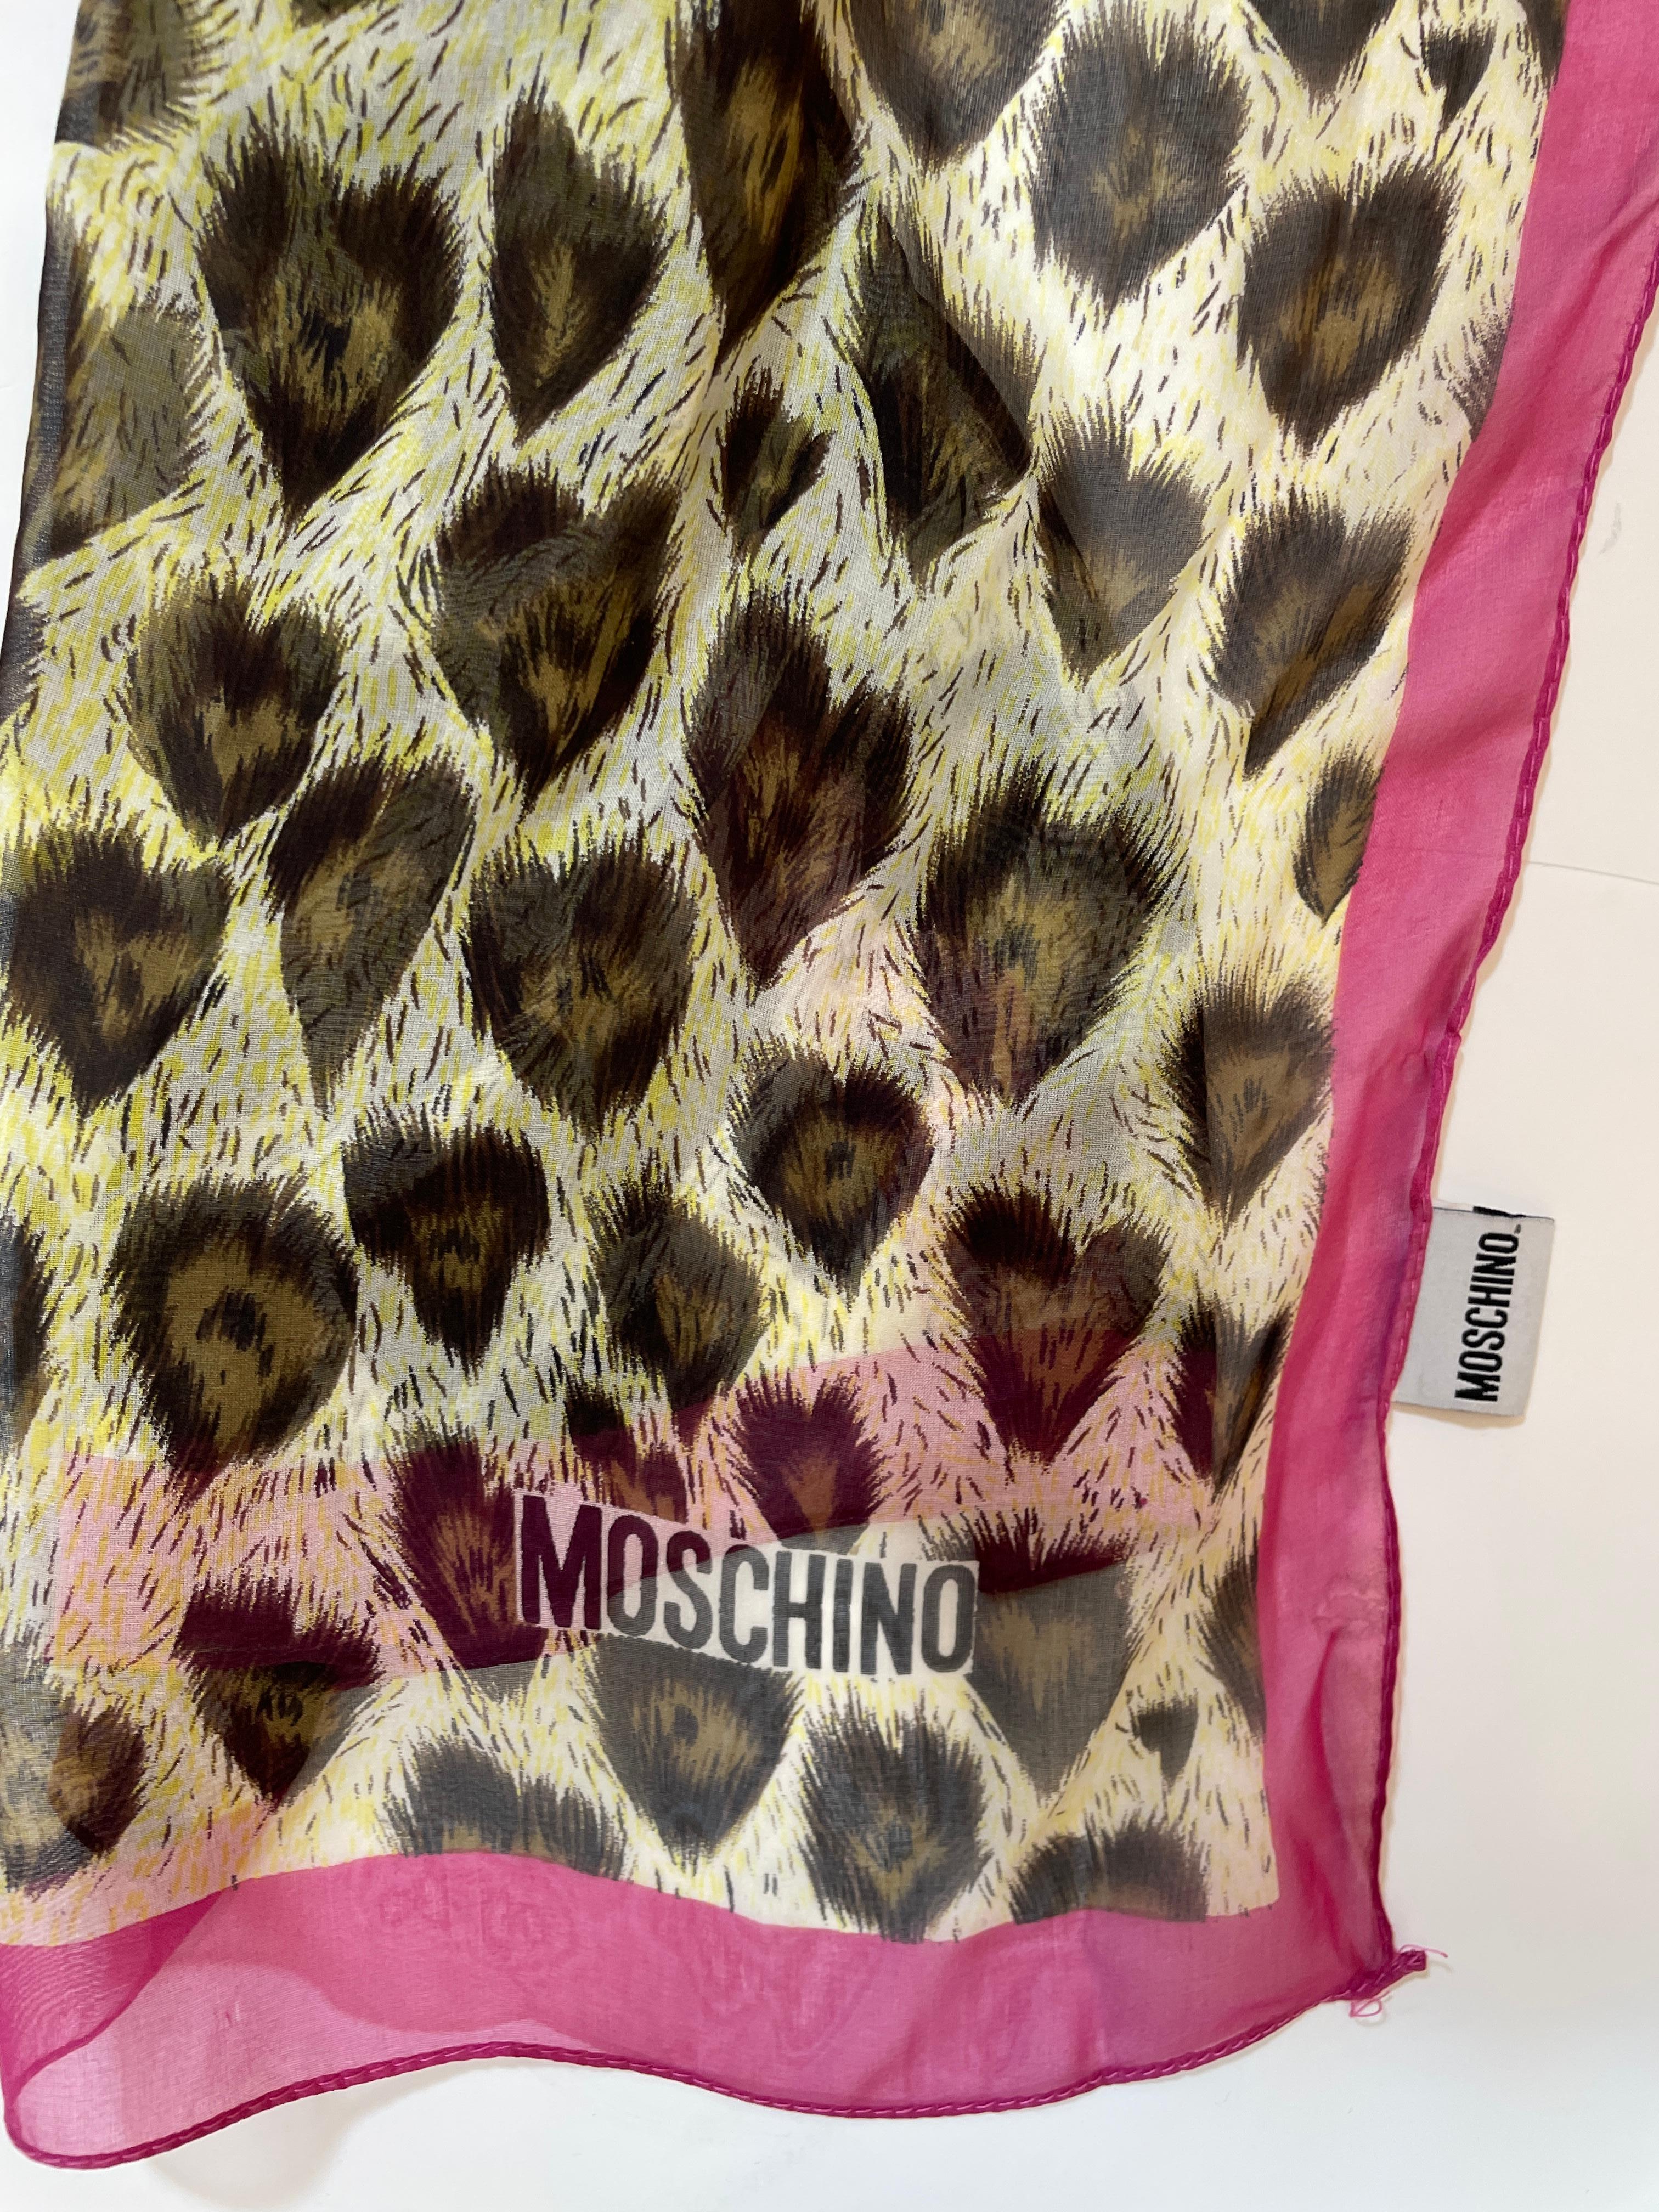 Moschino Animal Print Silk Scarf Made In Italy Pink And Brown 1990s Head Wrap In Good Condition For Sale In North Hollywood, CA